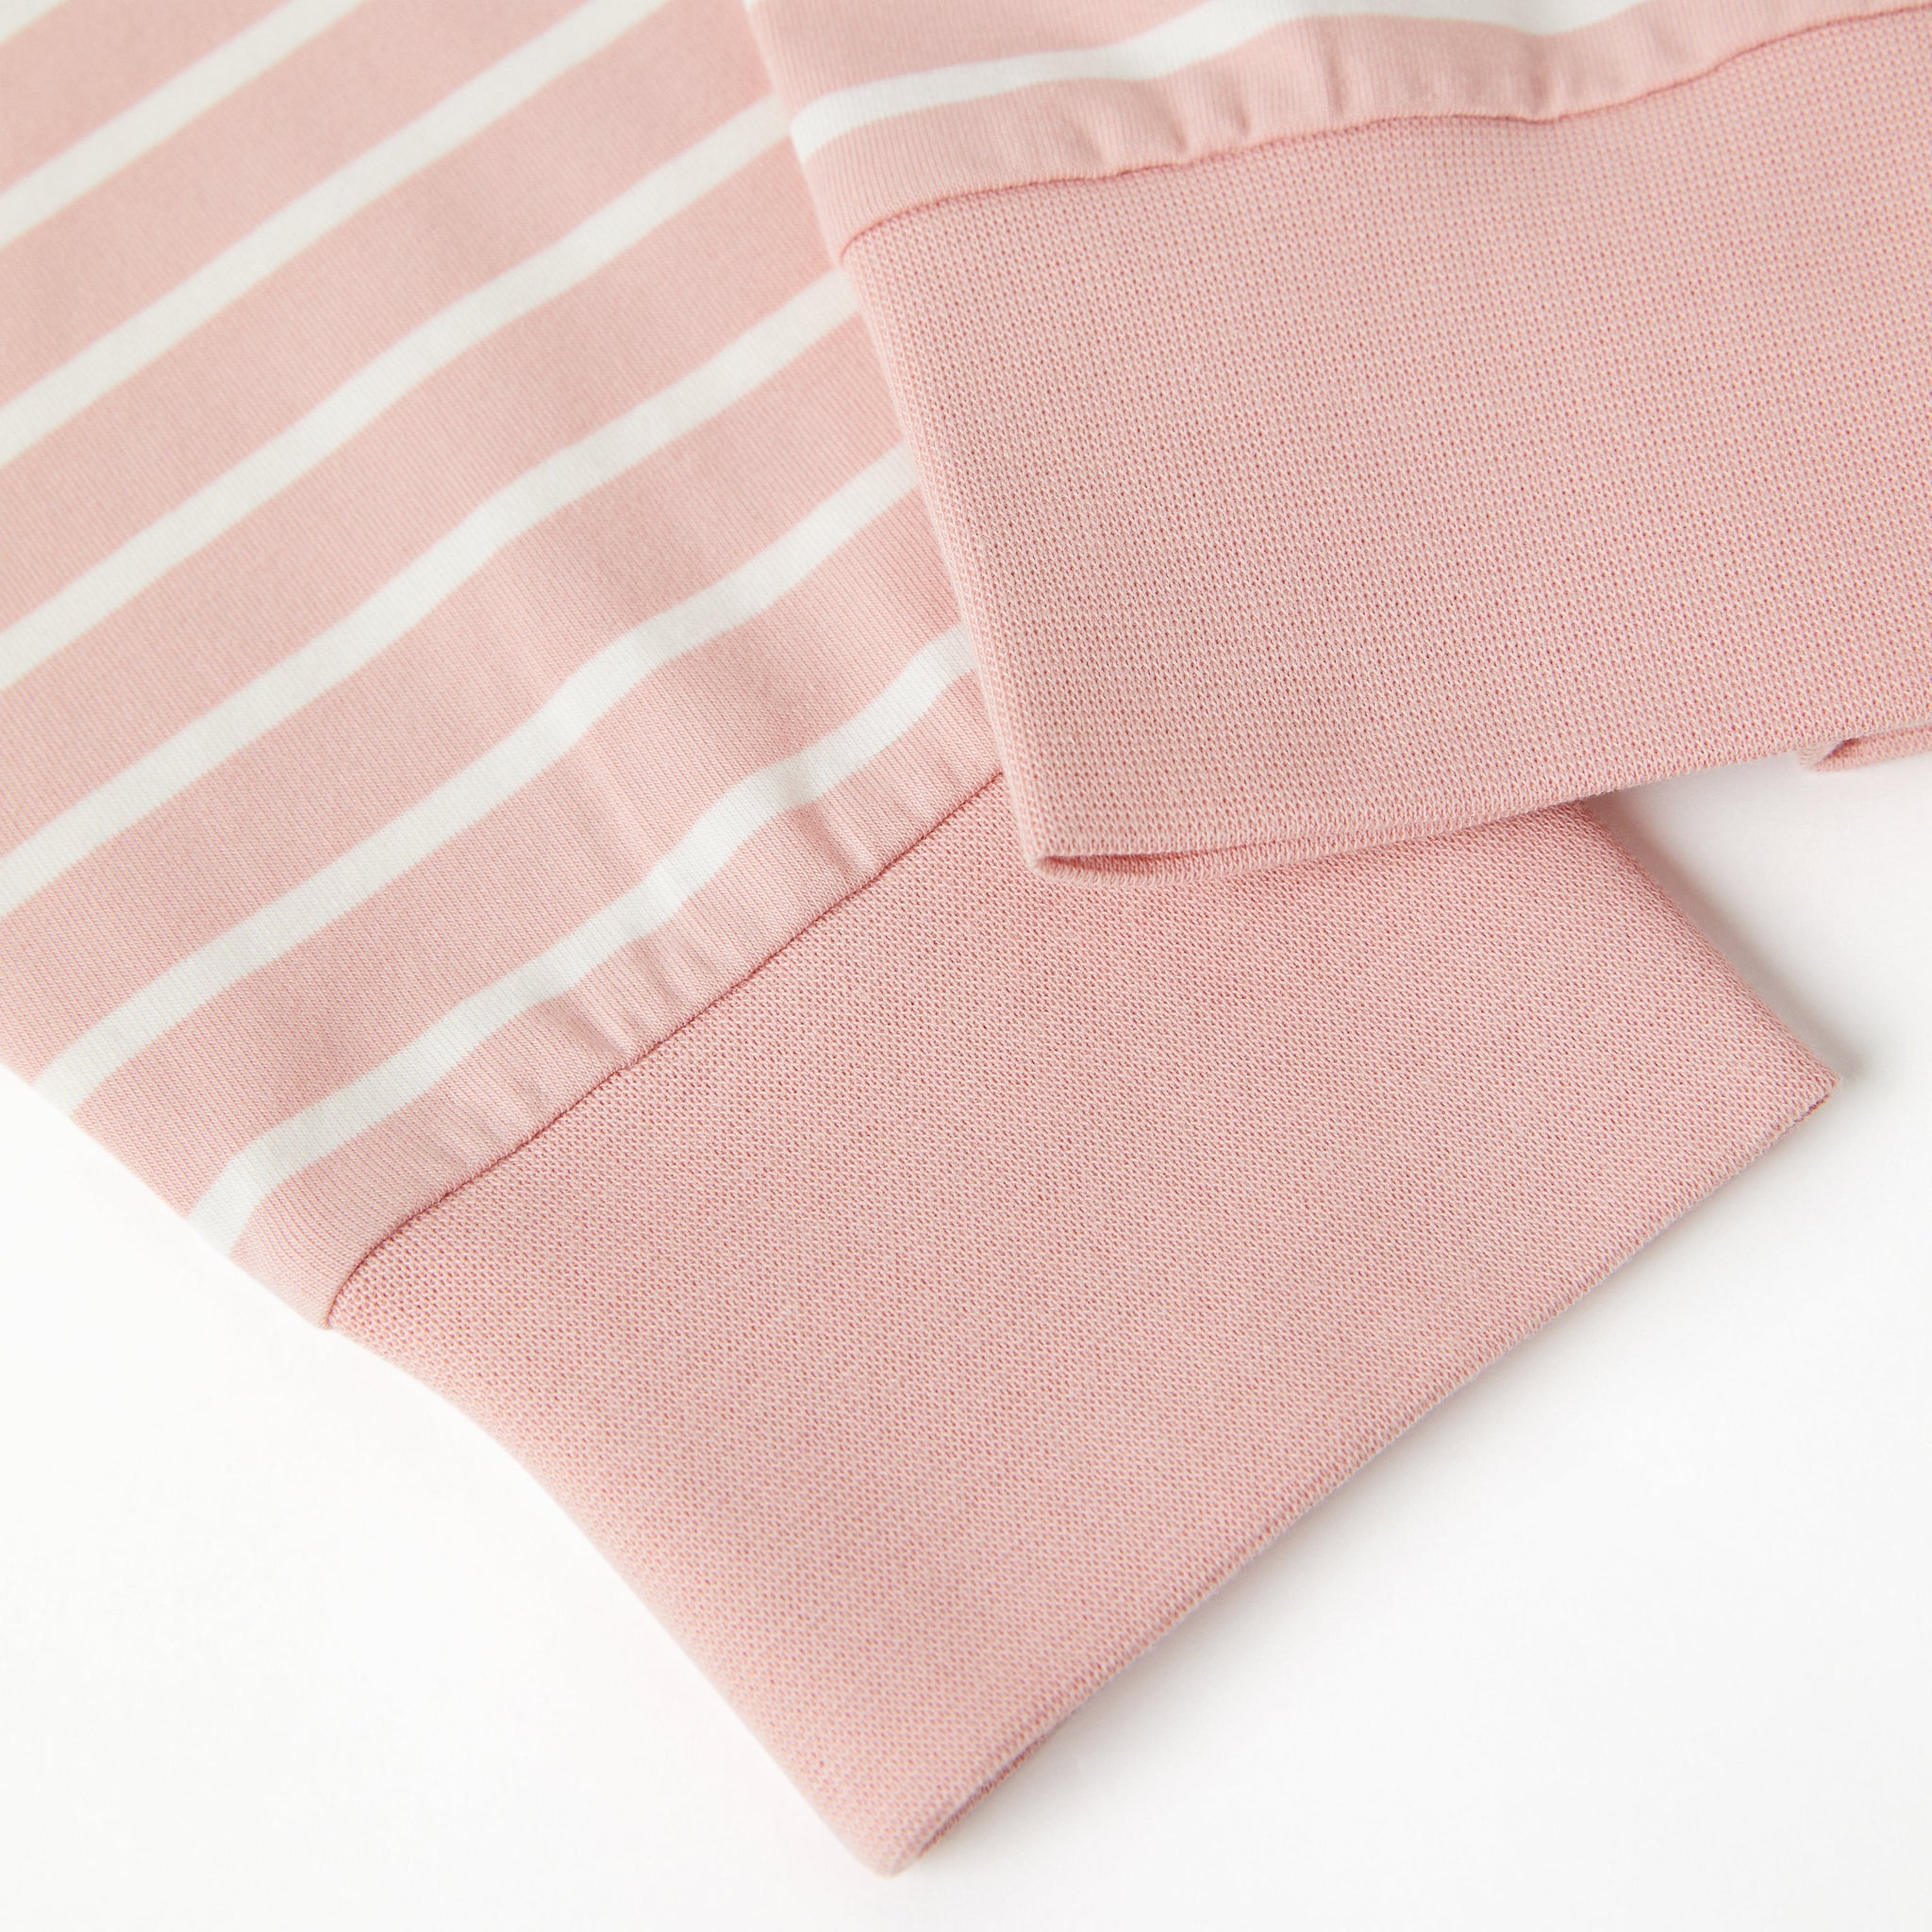 Striped Pink Adult Nightdress from the Polarn O. Pyret adult collection. Adult nightwear from sustainably sourced materials